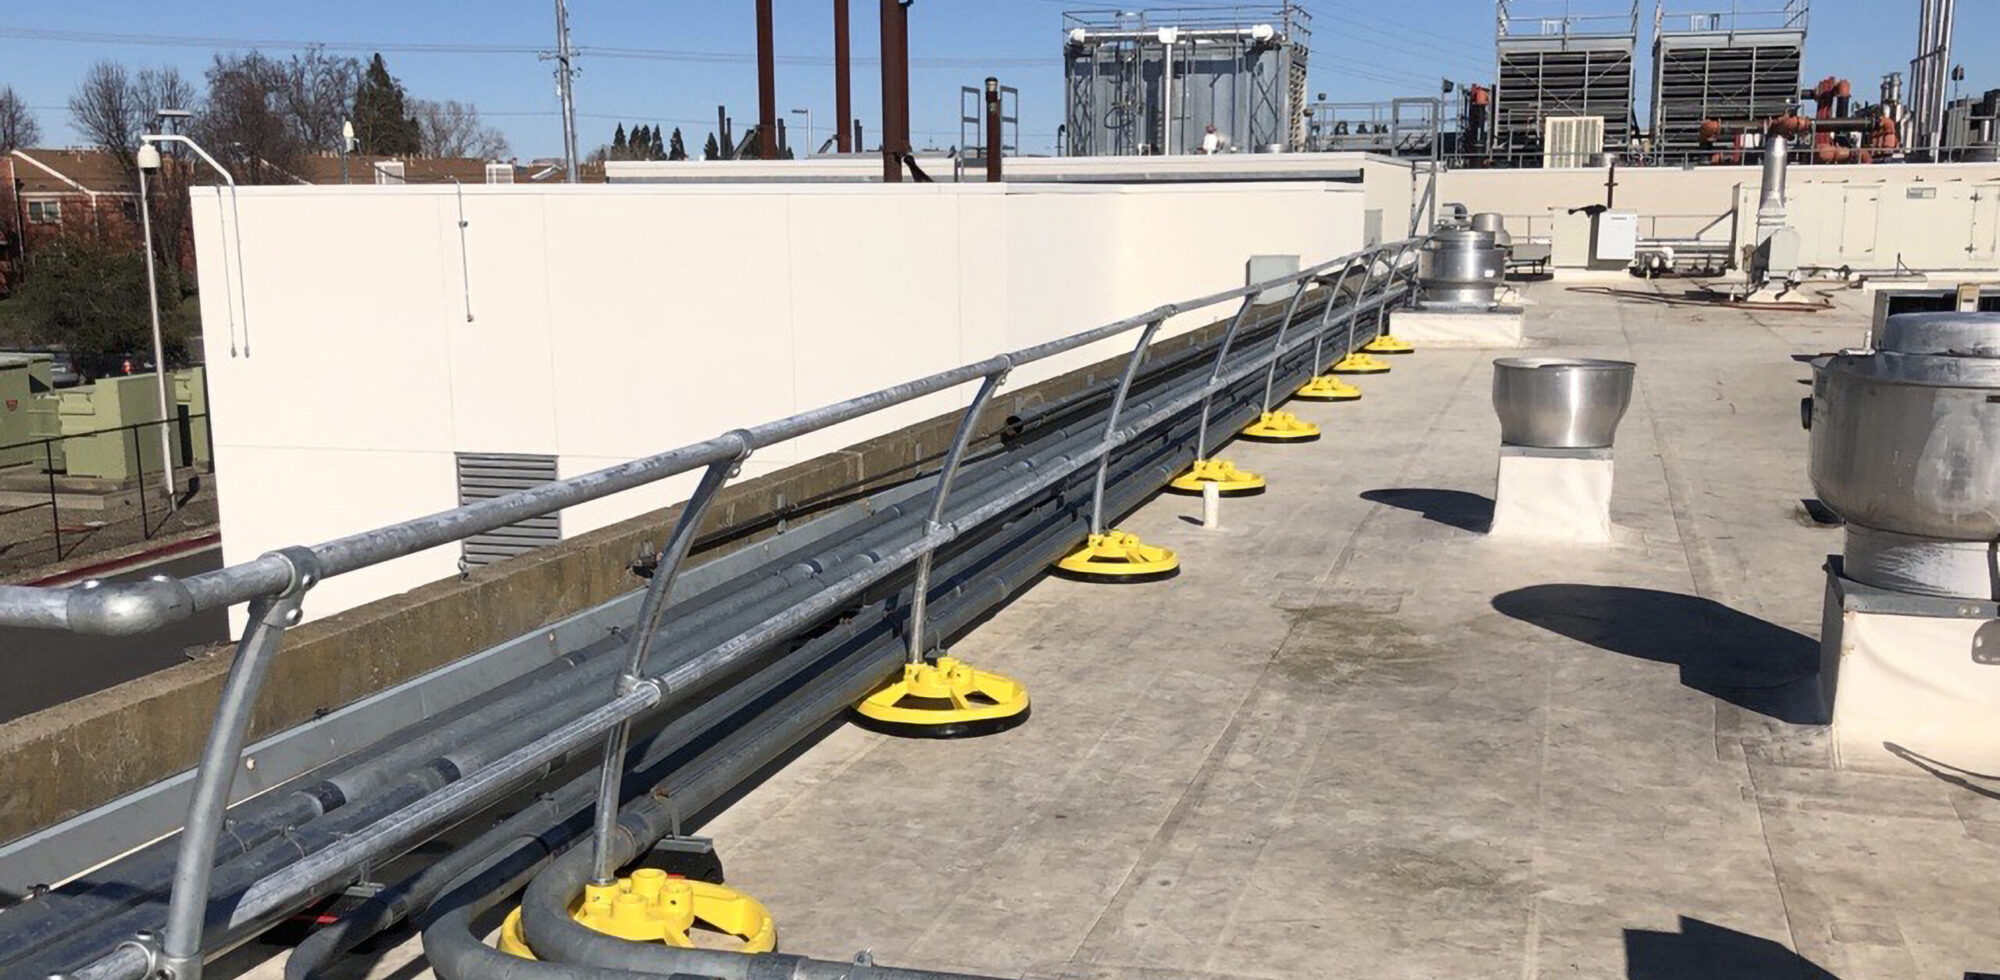 Accu-fit Rail on Roof